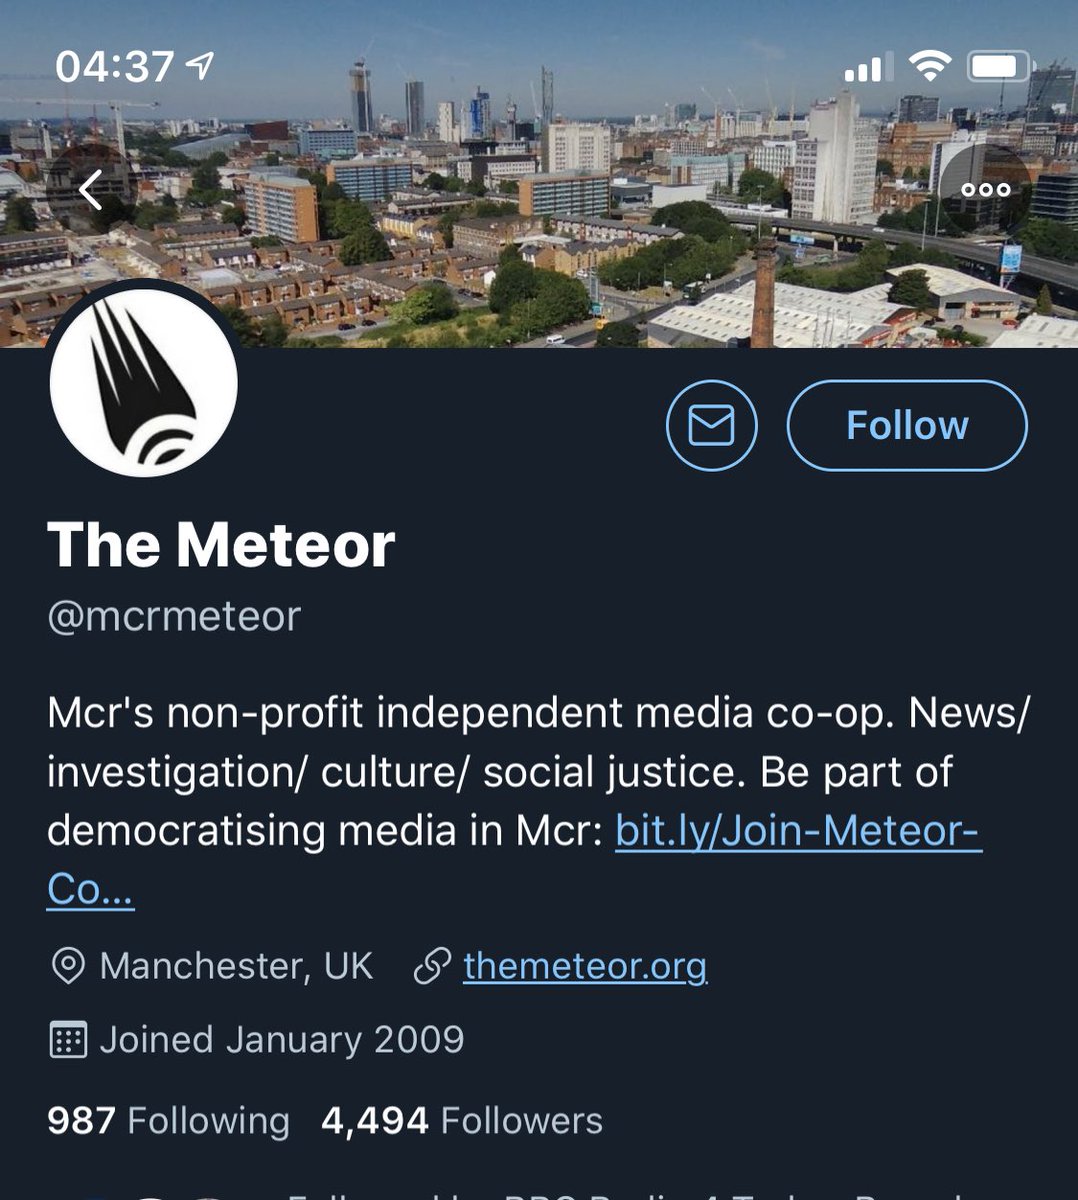 P.S it would appear from research that she is a contributing author for  @mcrmeteor who have issued the statement in a picture below, given her lack of remorse, the clear attempt to hide this, I would say “talking too” should be “distancing themselves from” for “social justice”.